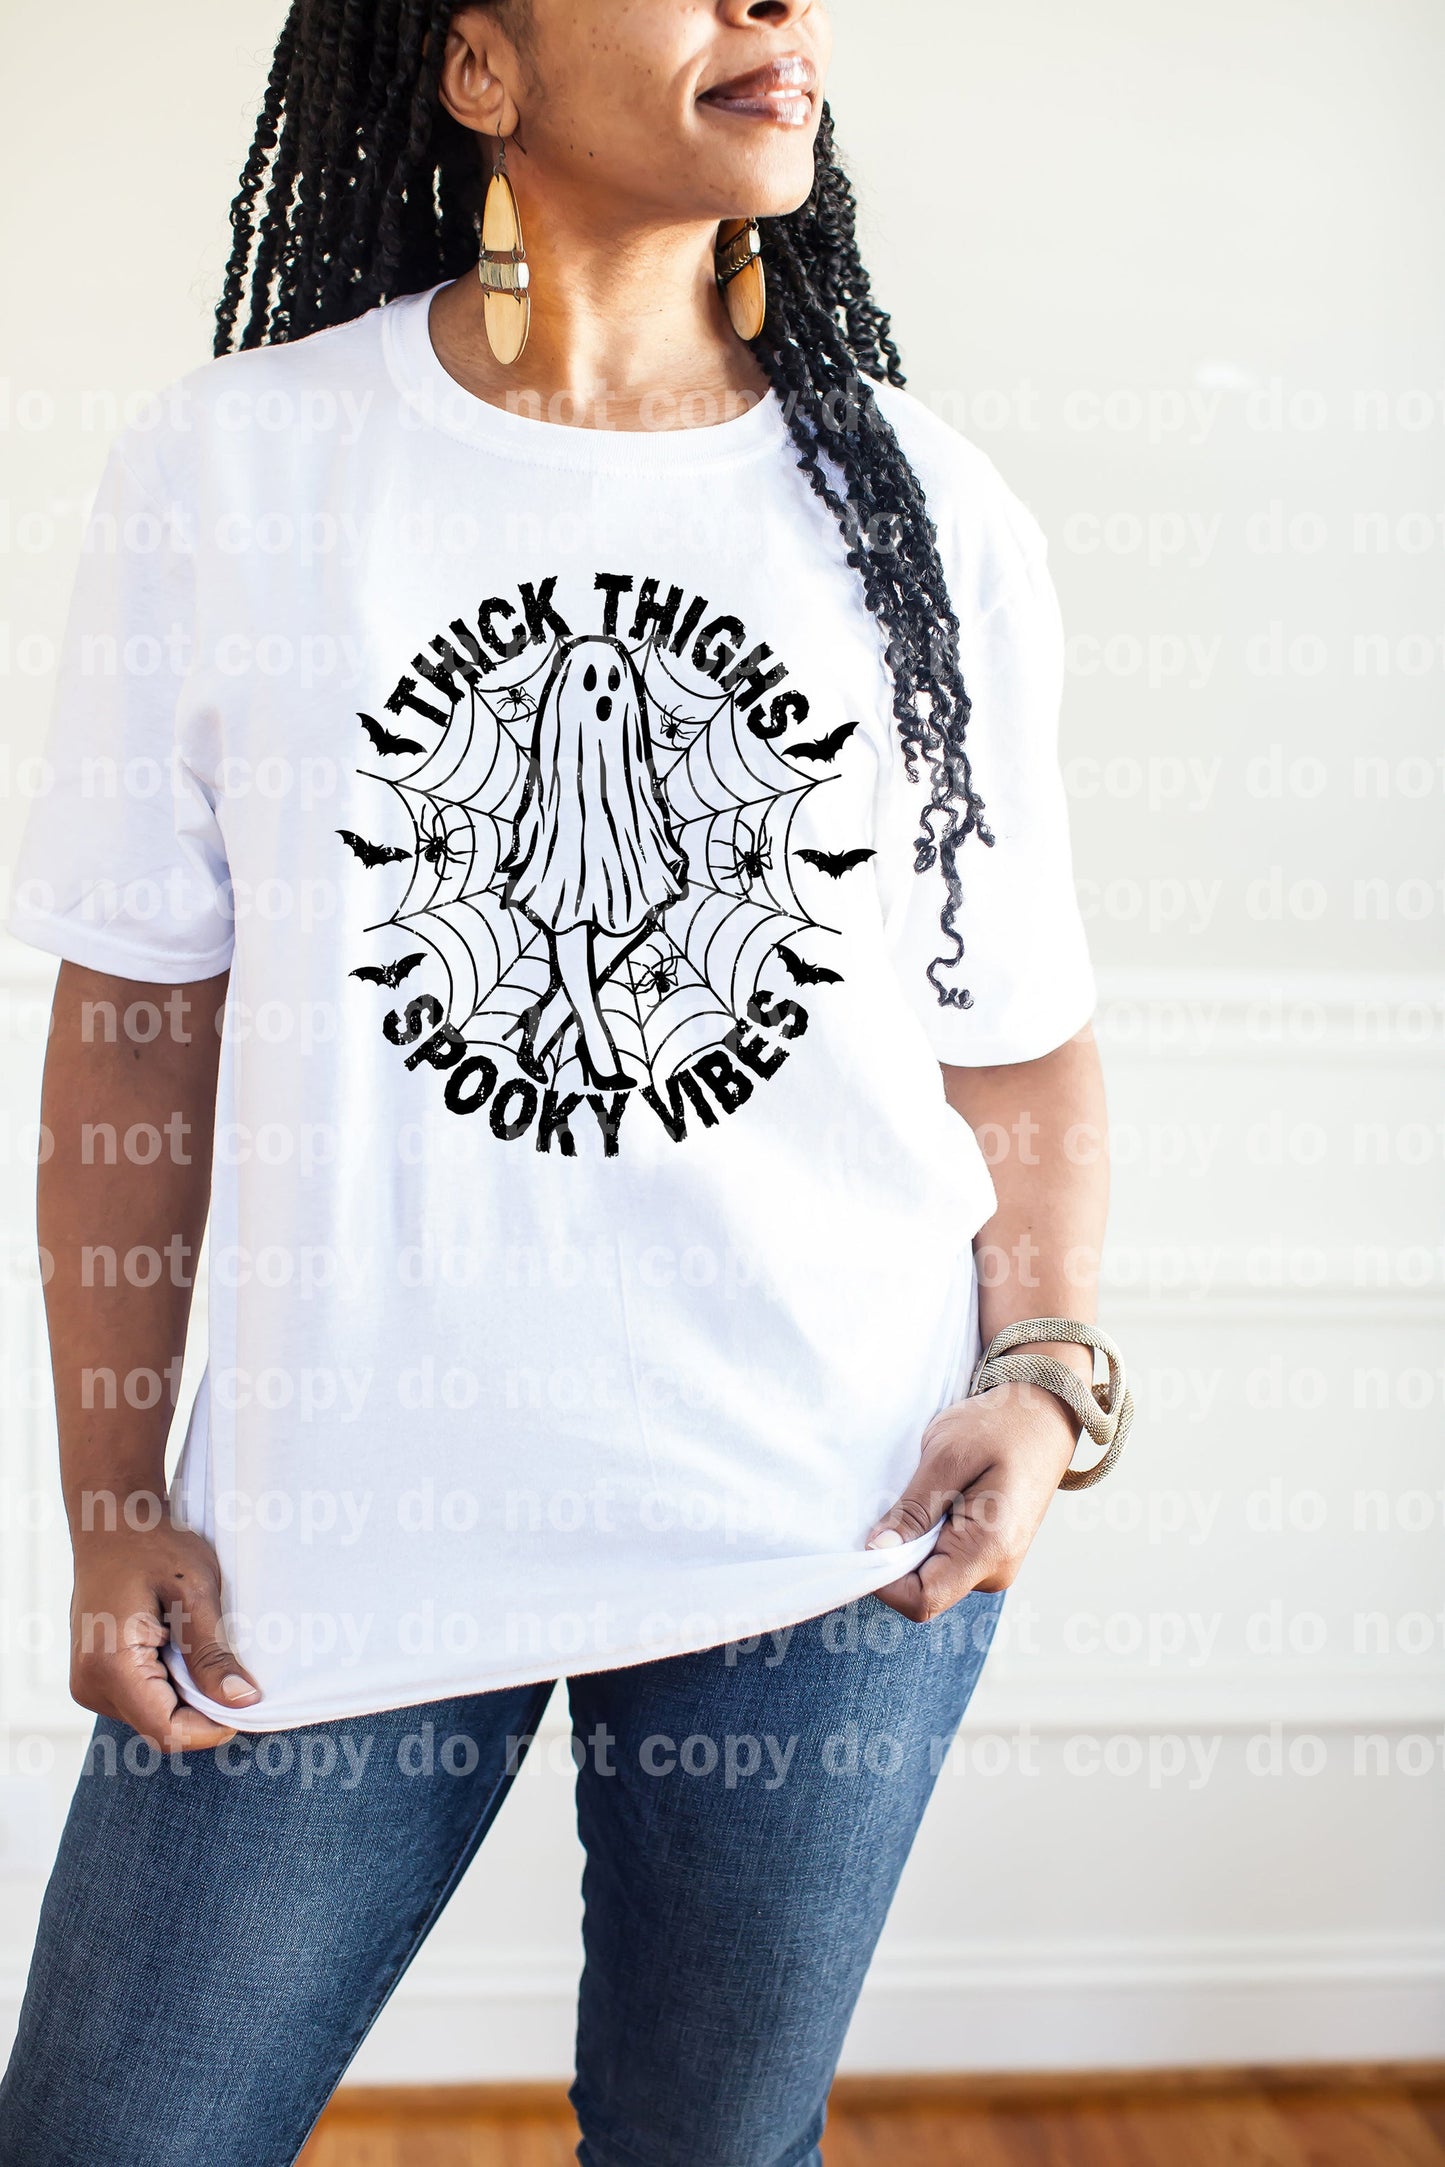 Thick Thighs Spooky Vibes Distressed Full Color/One Color Dream Print or Sublimation Print